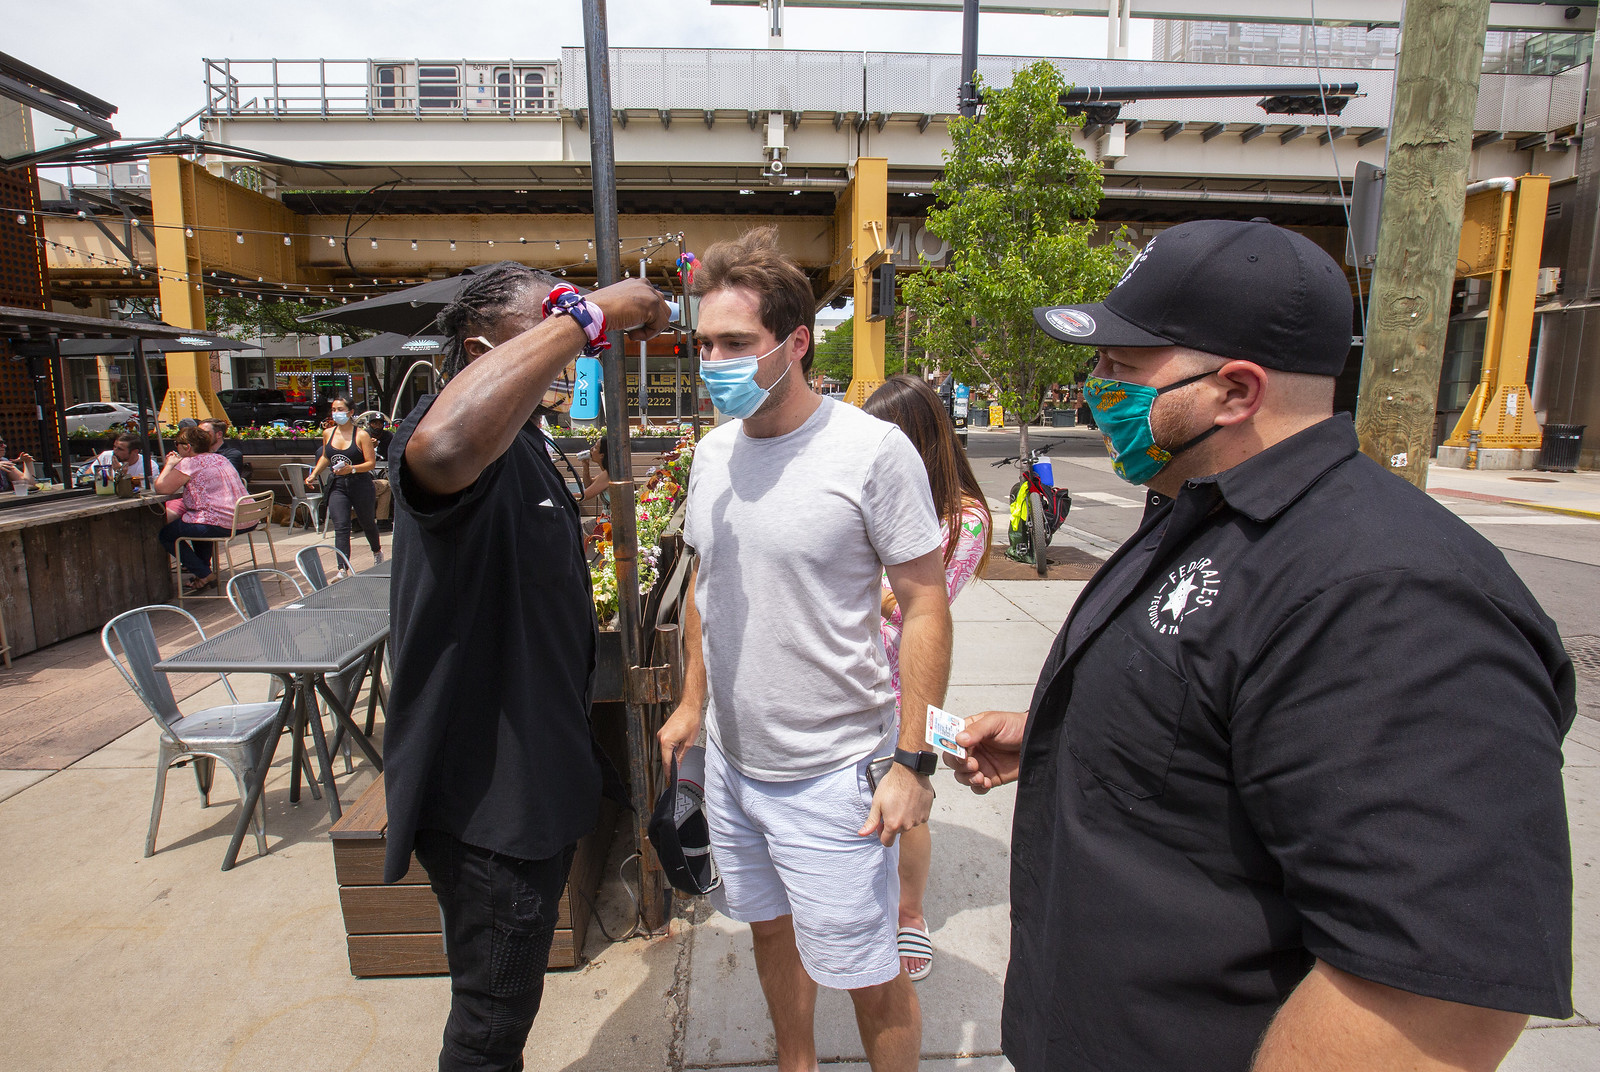 A bouncer with mask outside a bar taking temps of two masked customers.